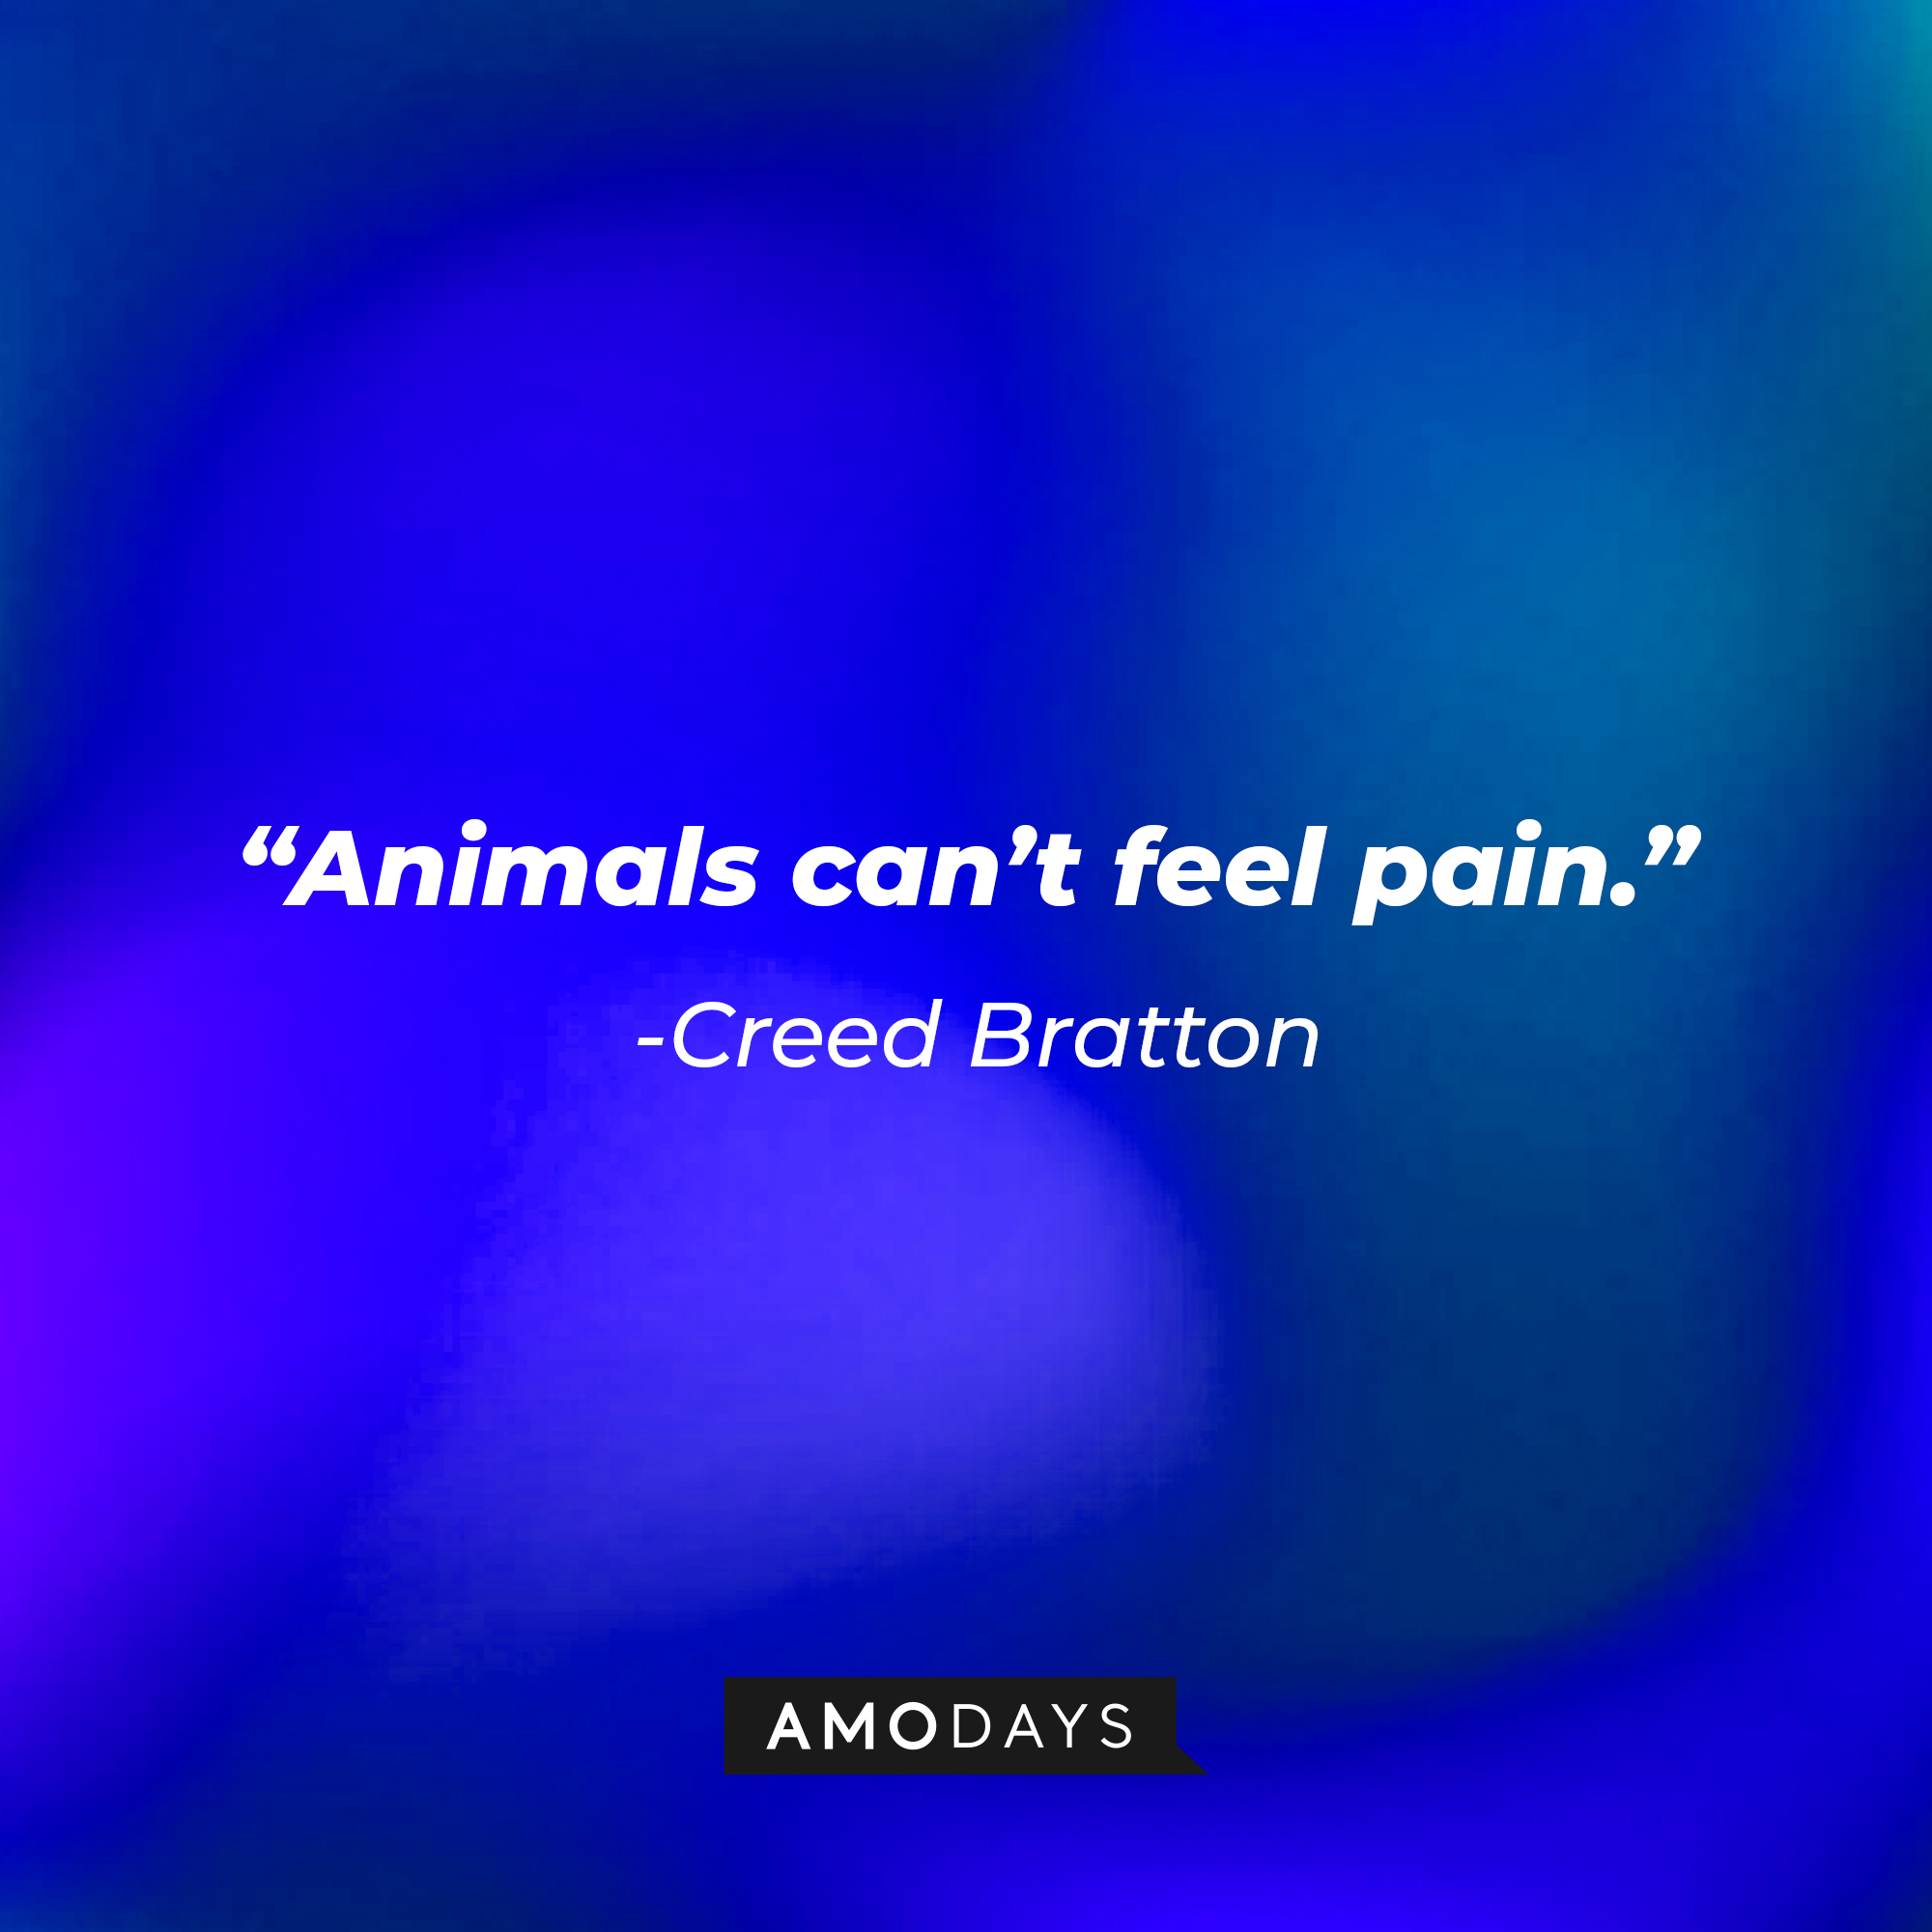 Creed Bratton's quote: "Animals can't feel pain." | Source: Amodays